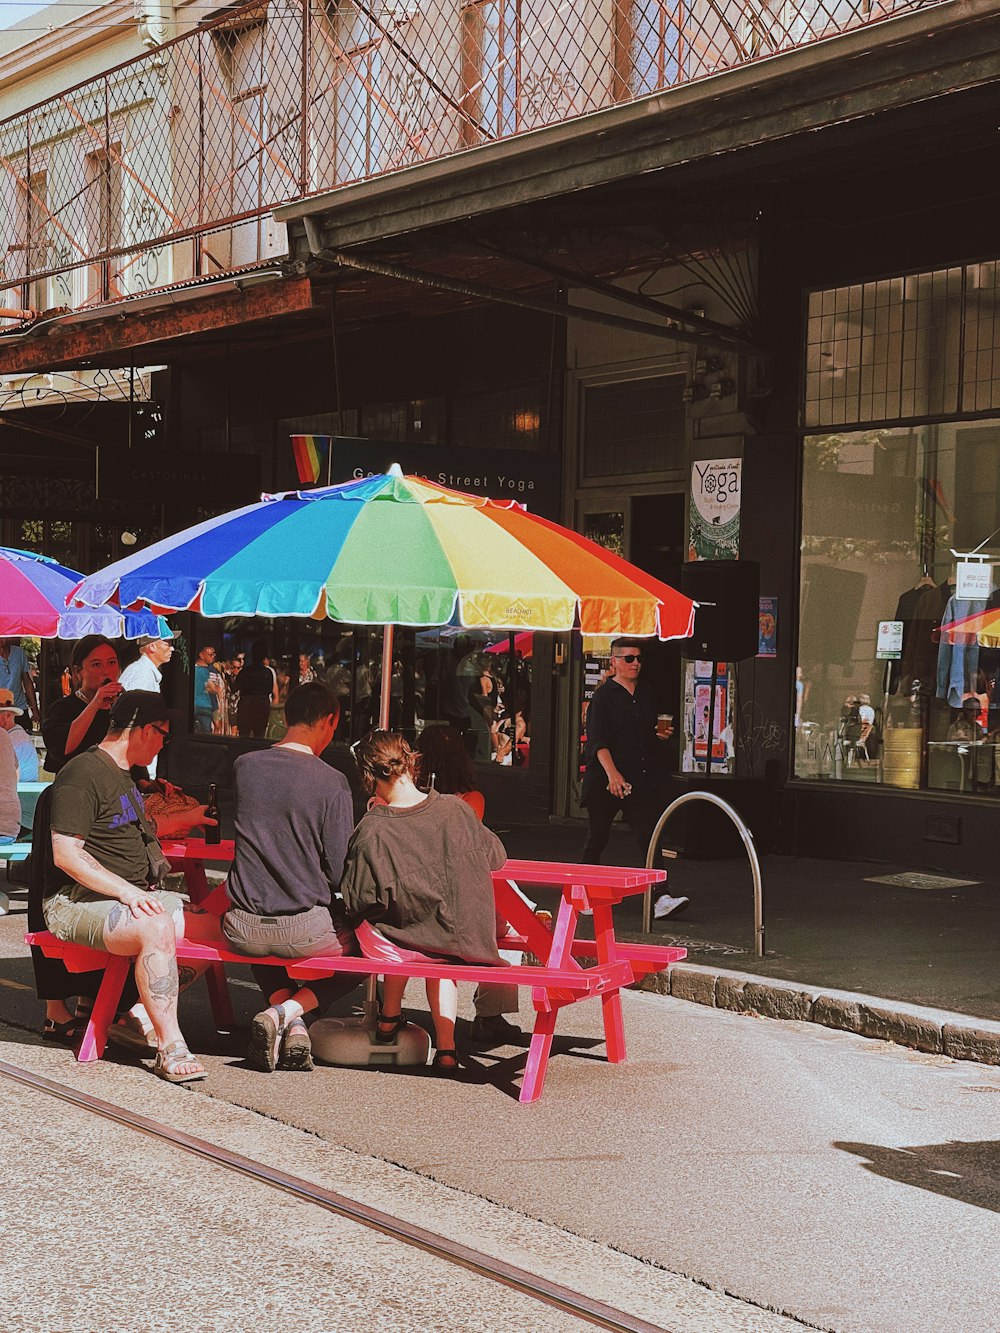 a group of people sitting on a red bench under an umbrella